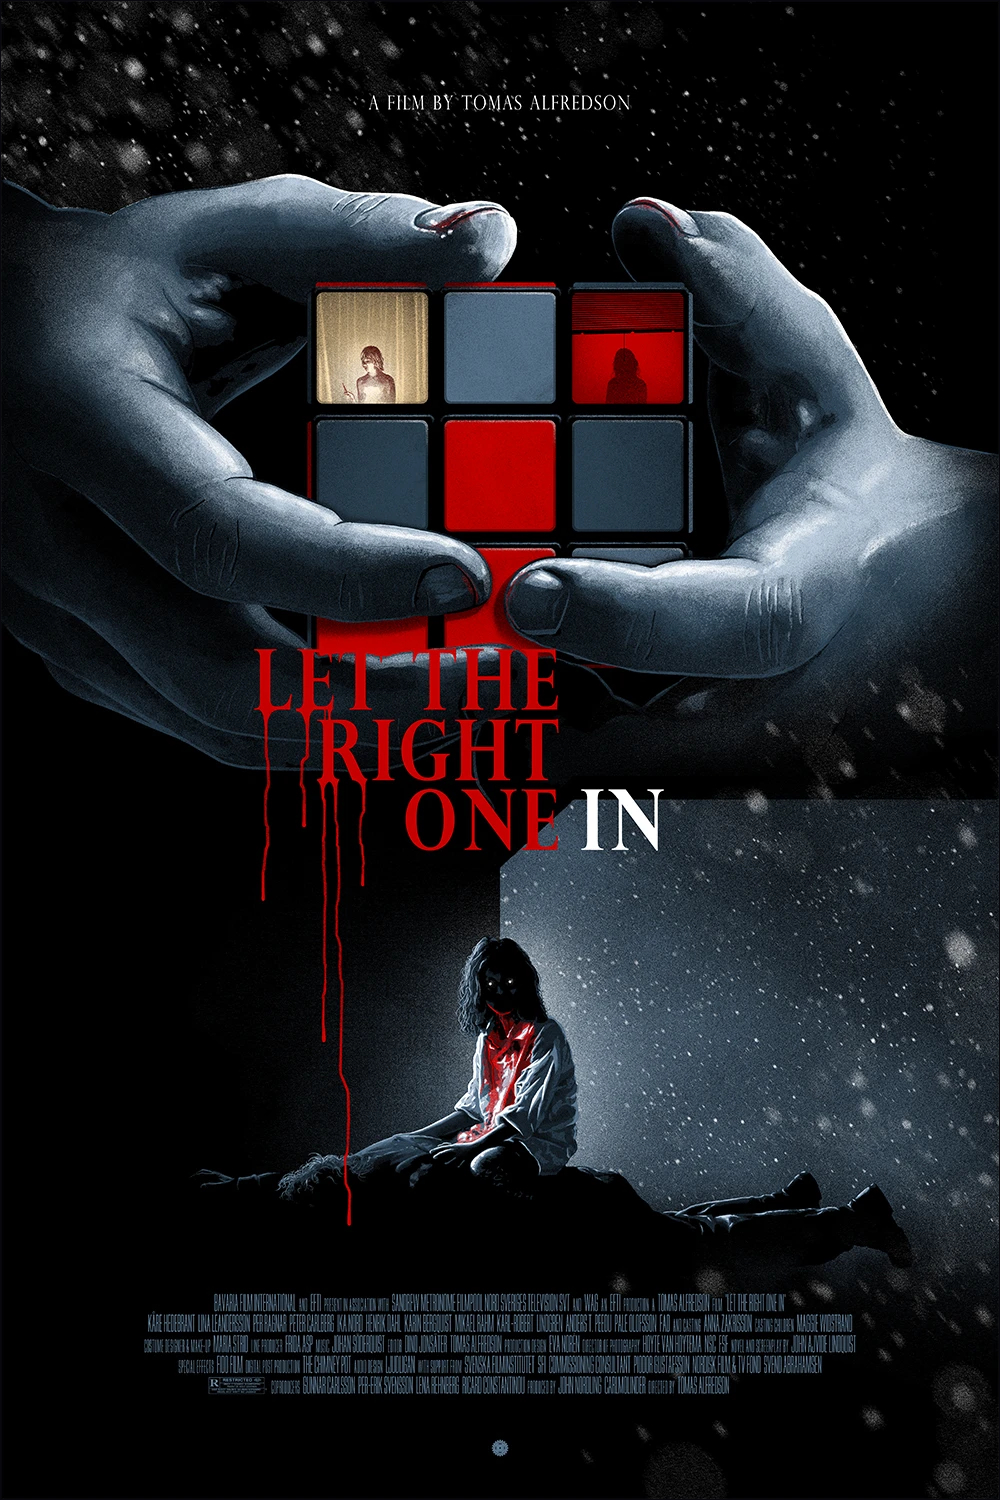 LET THE RIGHT ONE IN poster by Marko Manev